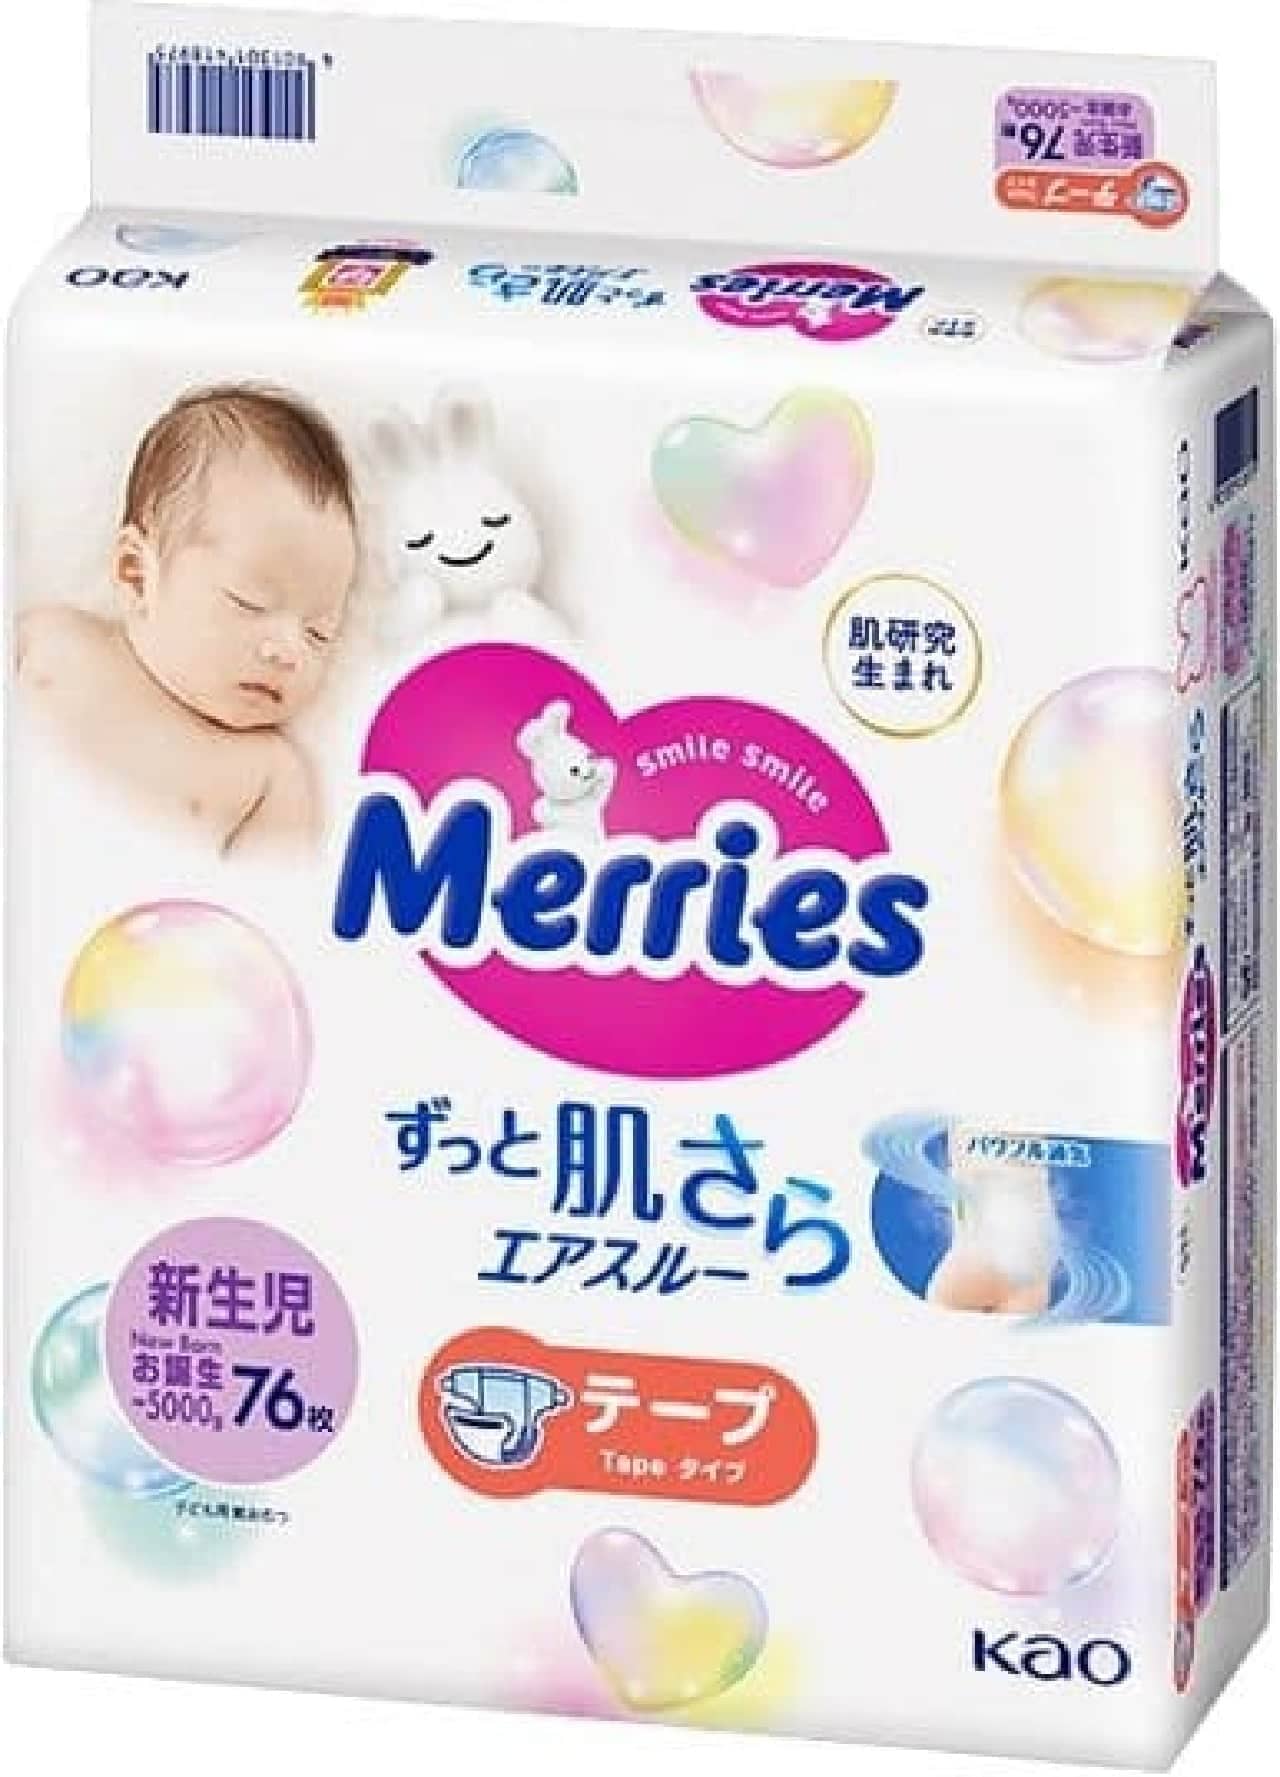 Mary's (Kao) disposable diapers